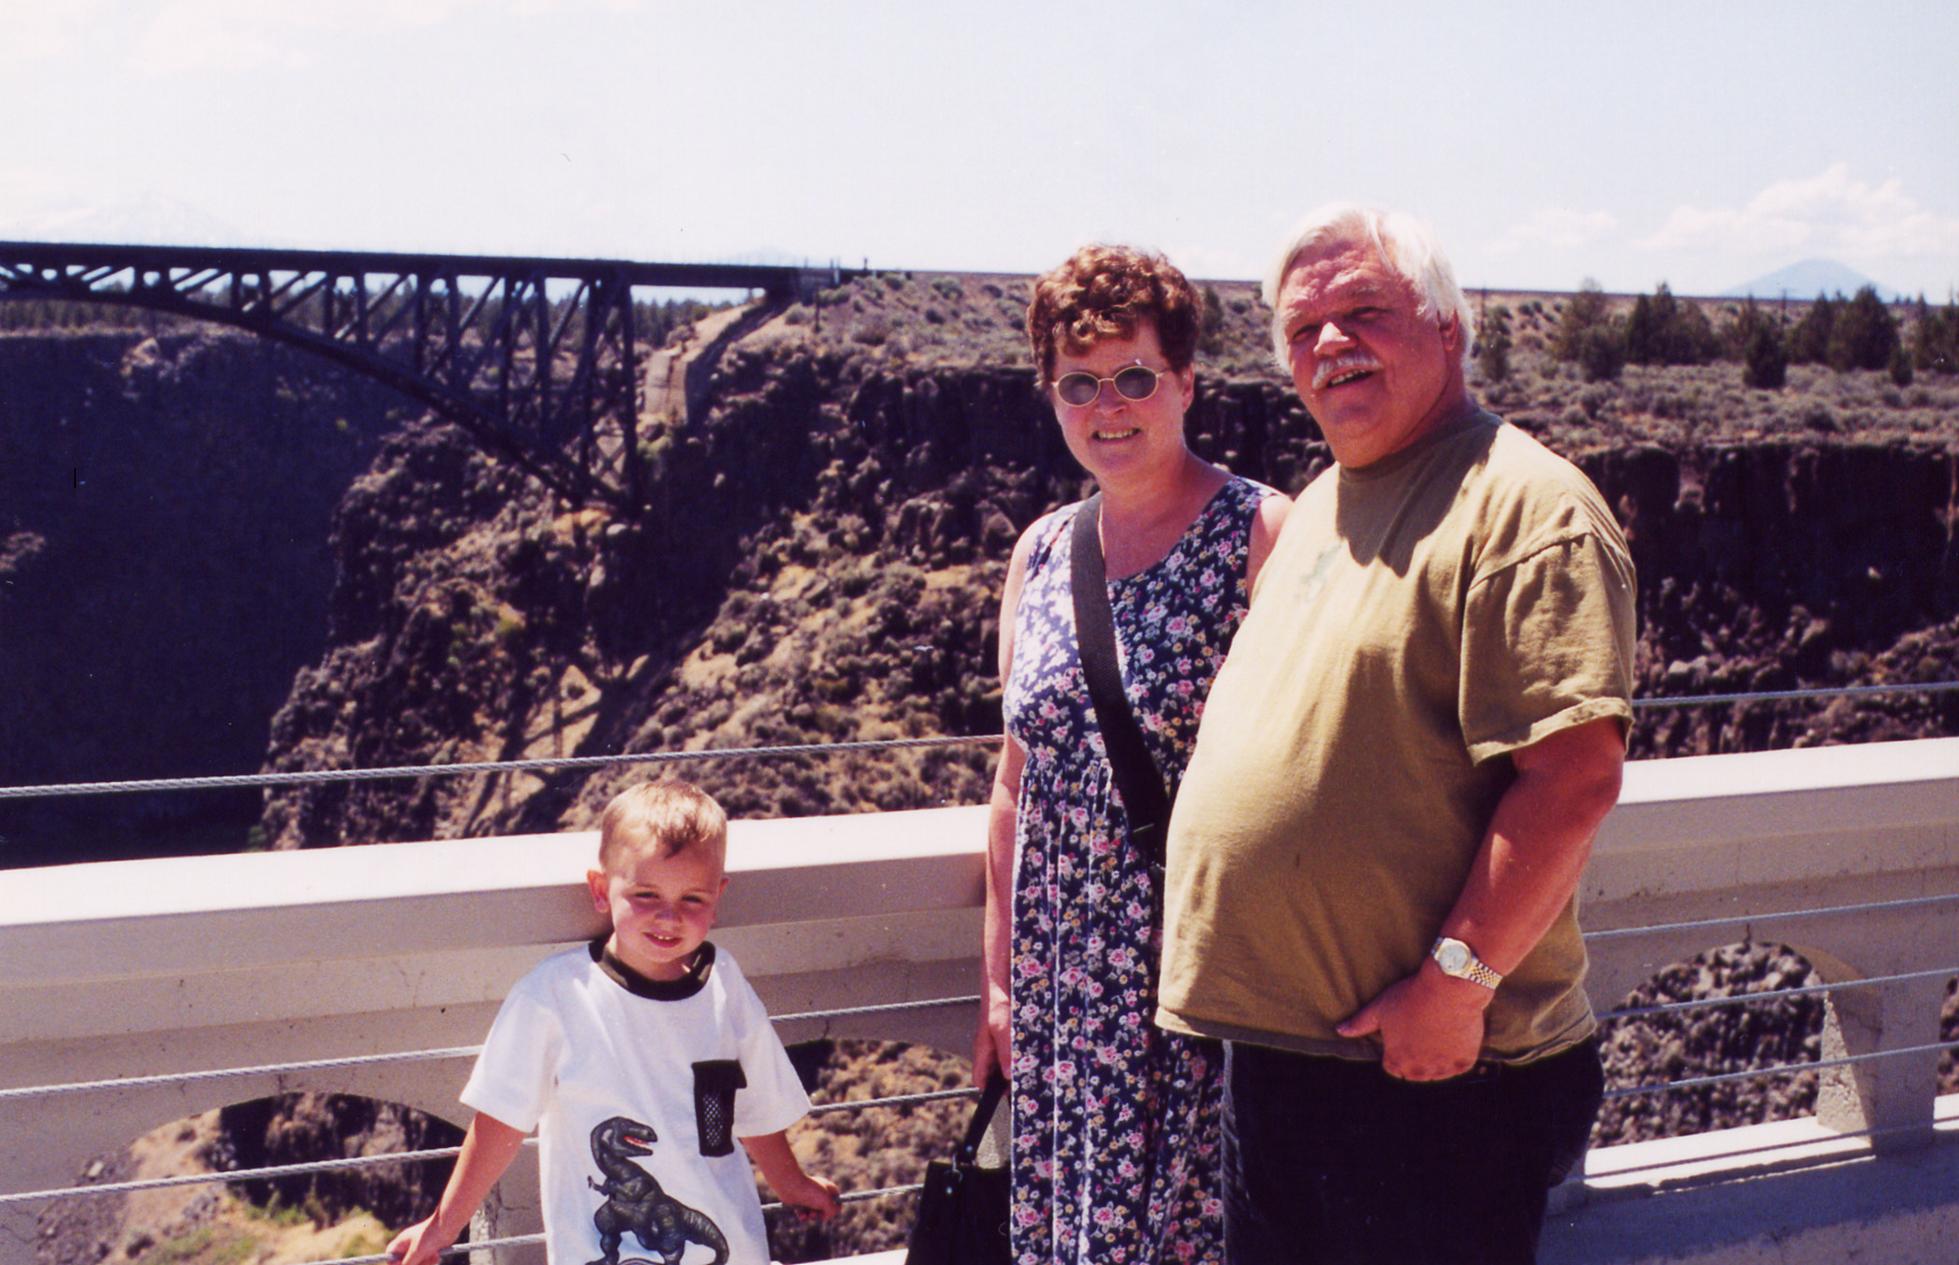 Paul on Right. First Wife Darlene, and Bobie on the New Crooked River Bridge, with old Bridge in the Background. July 2001